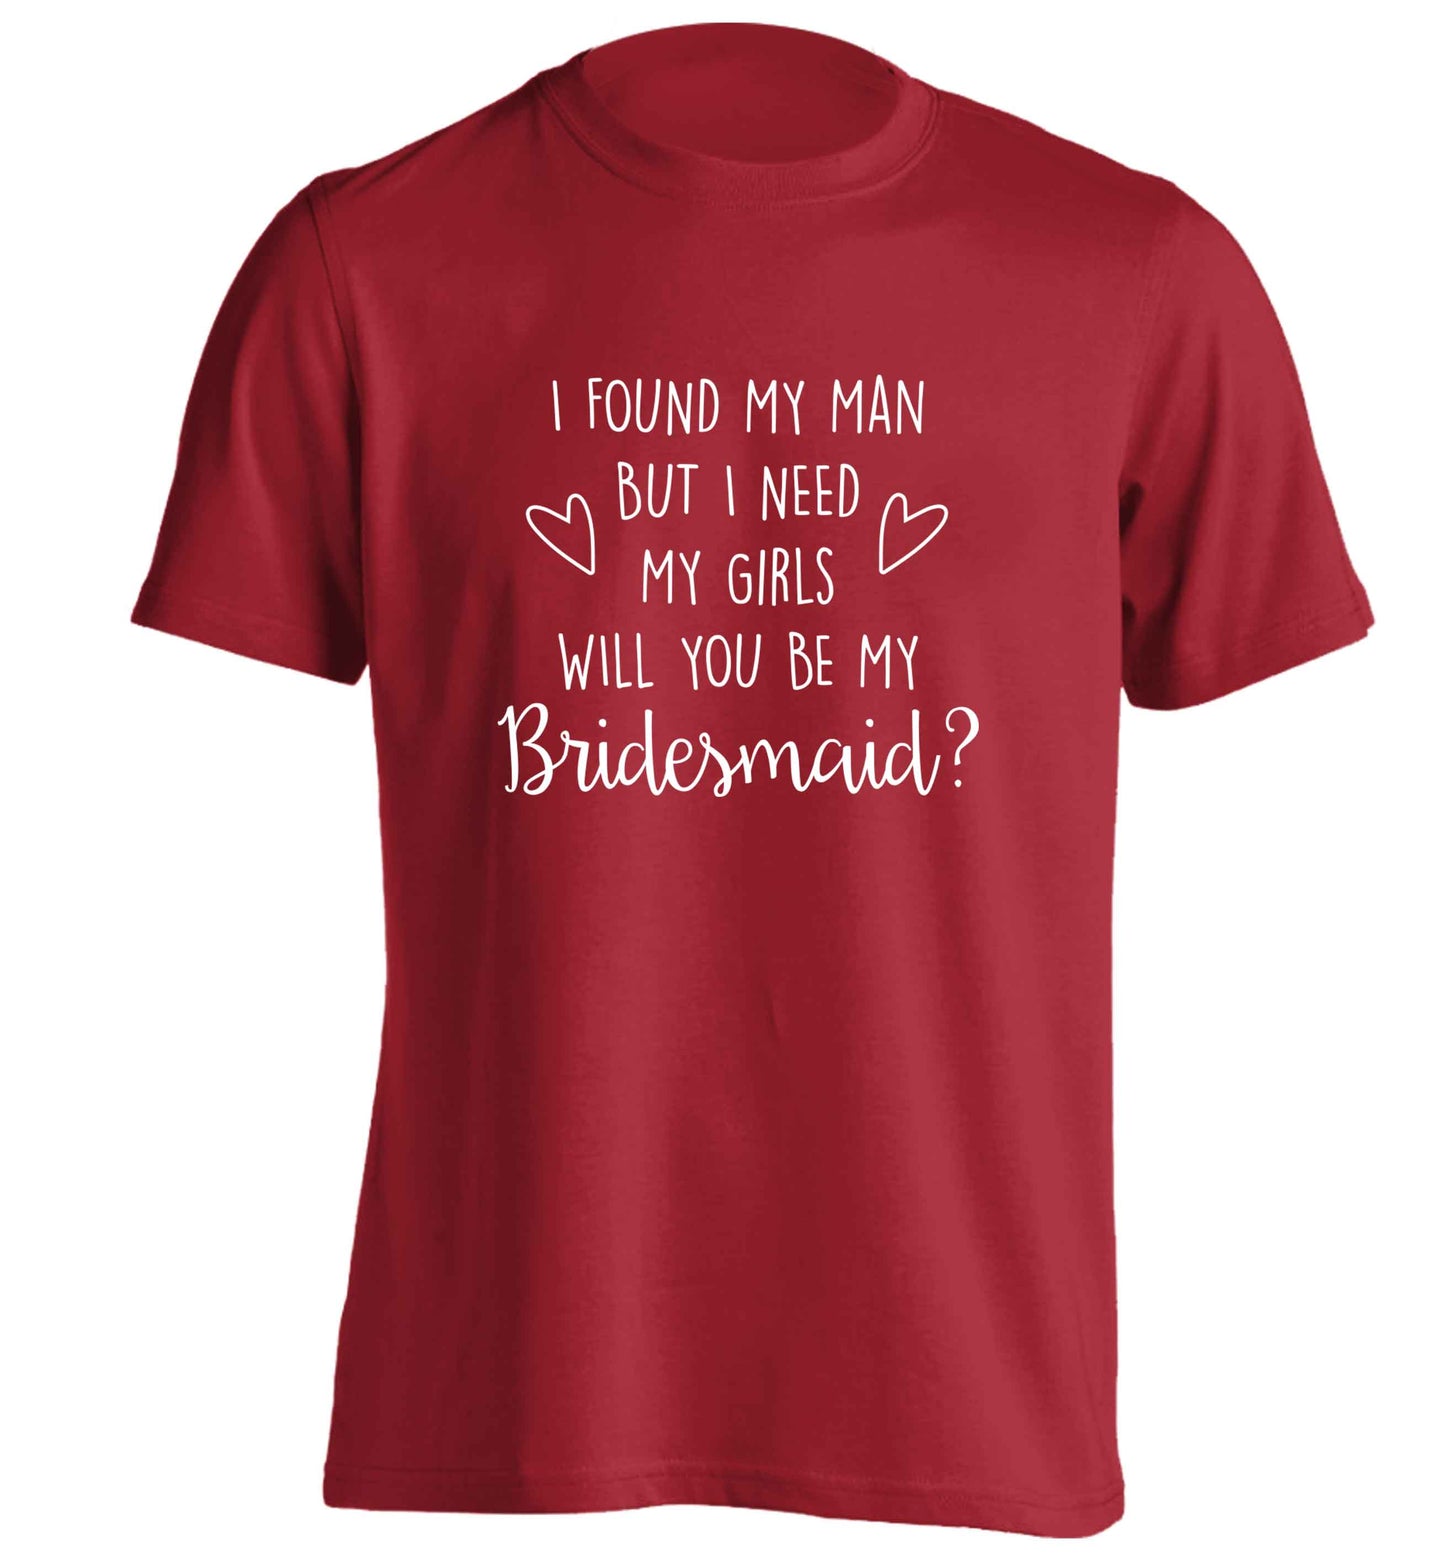 I found my man but I need my girls will you be my bridesmaid? adults unisex red Tshirt 2XL